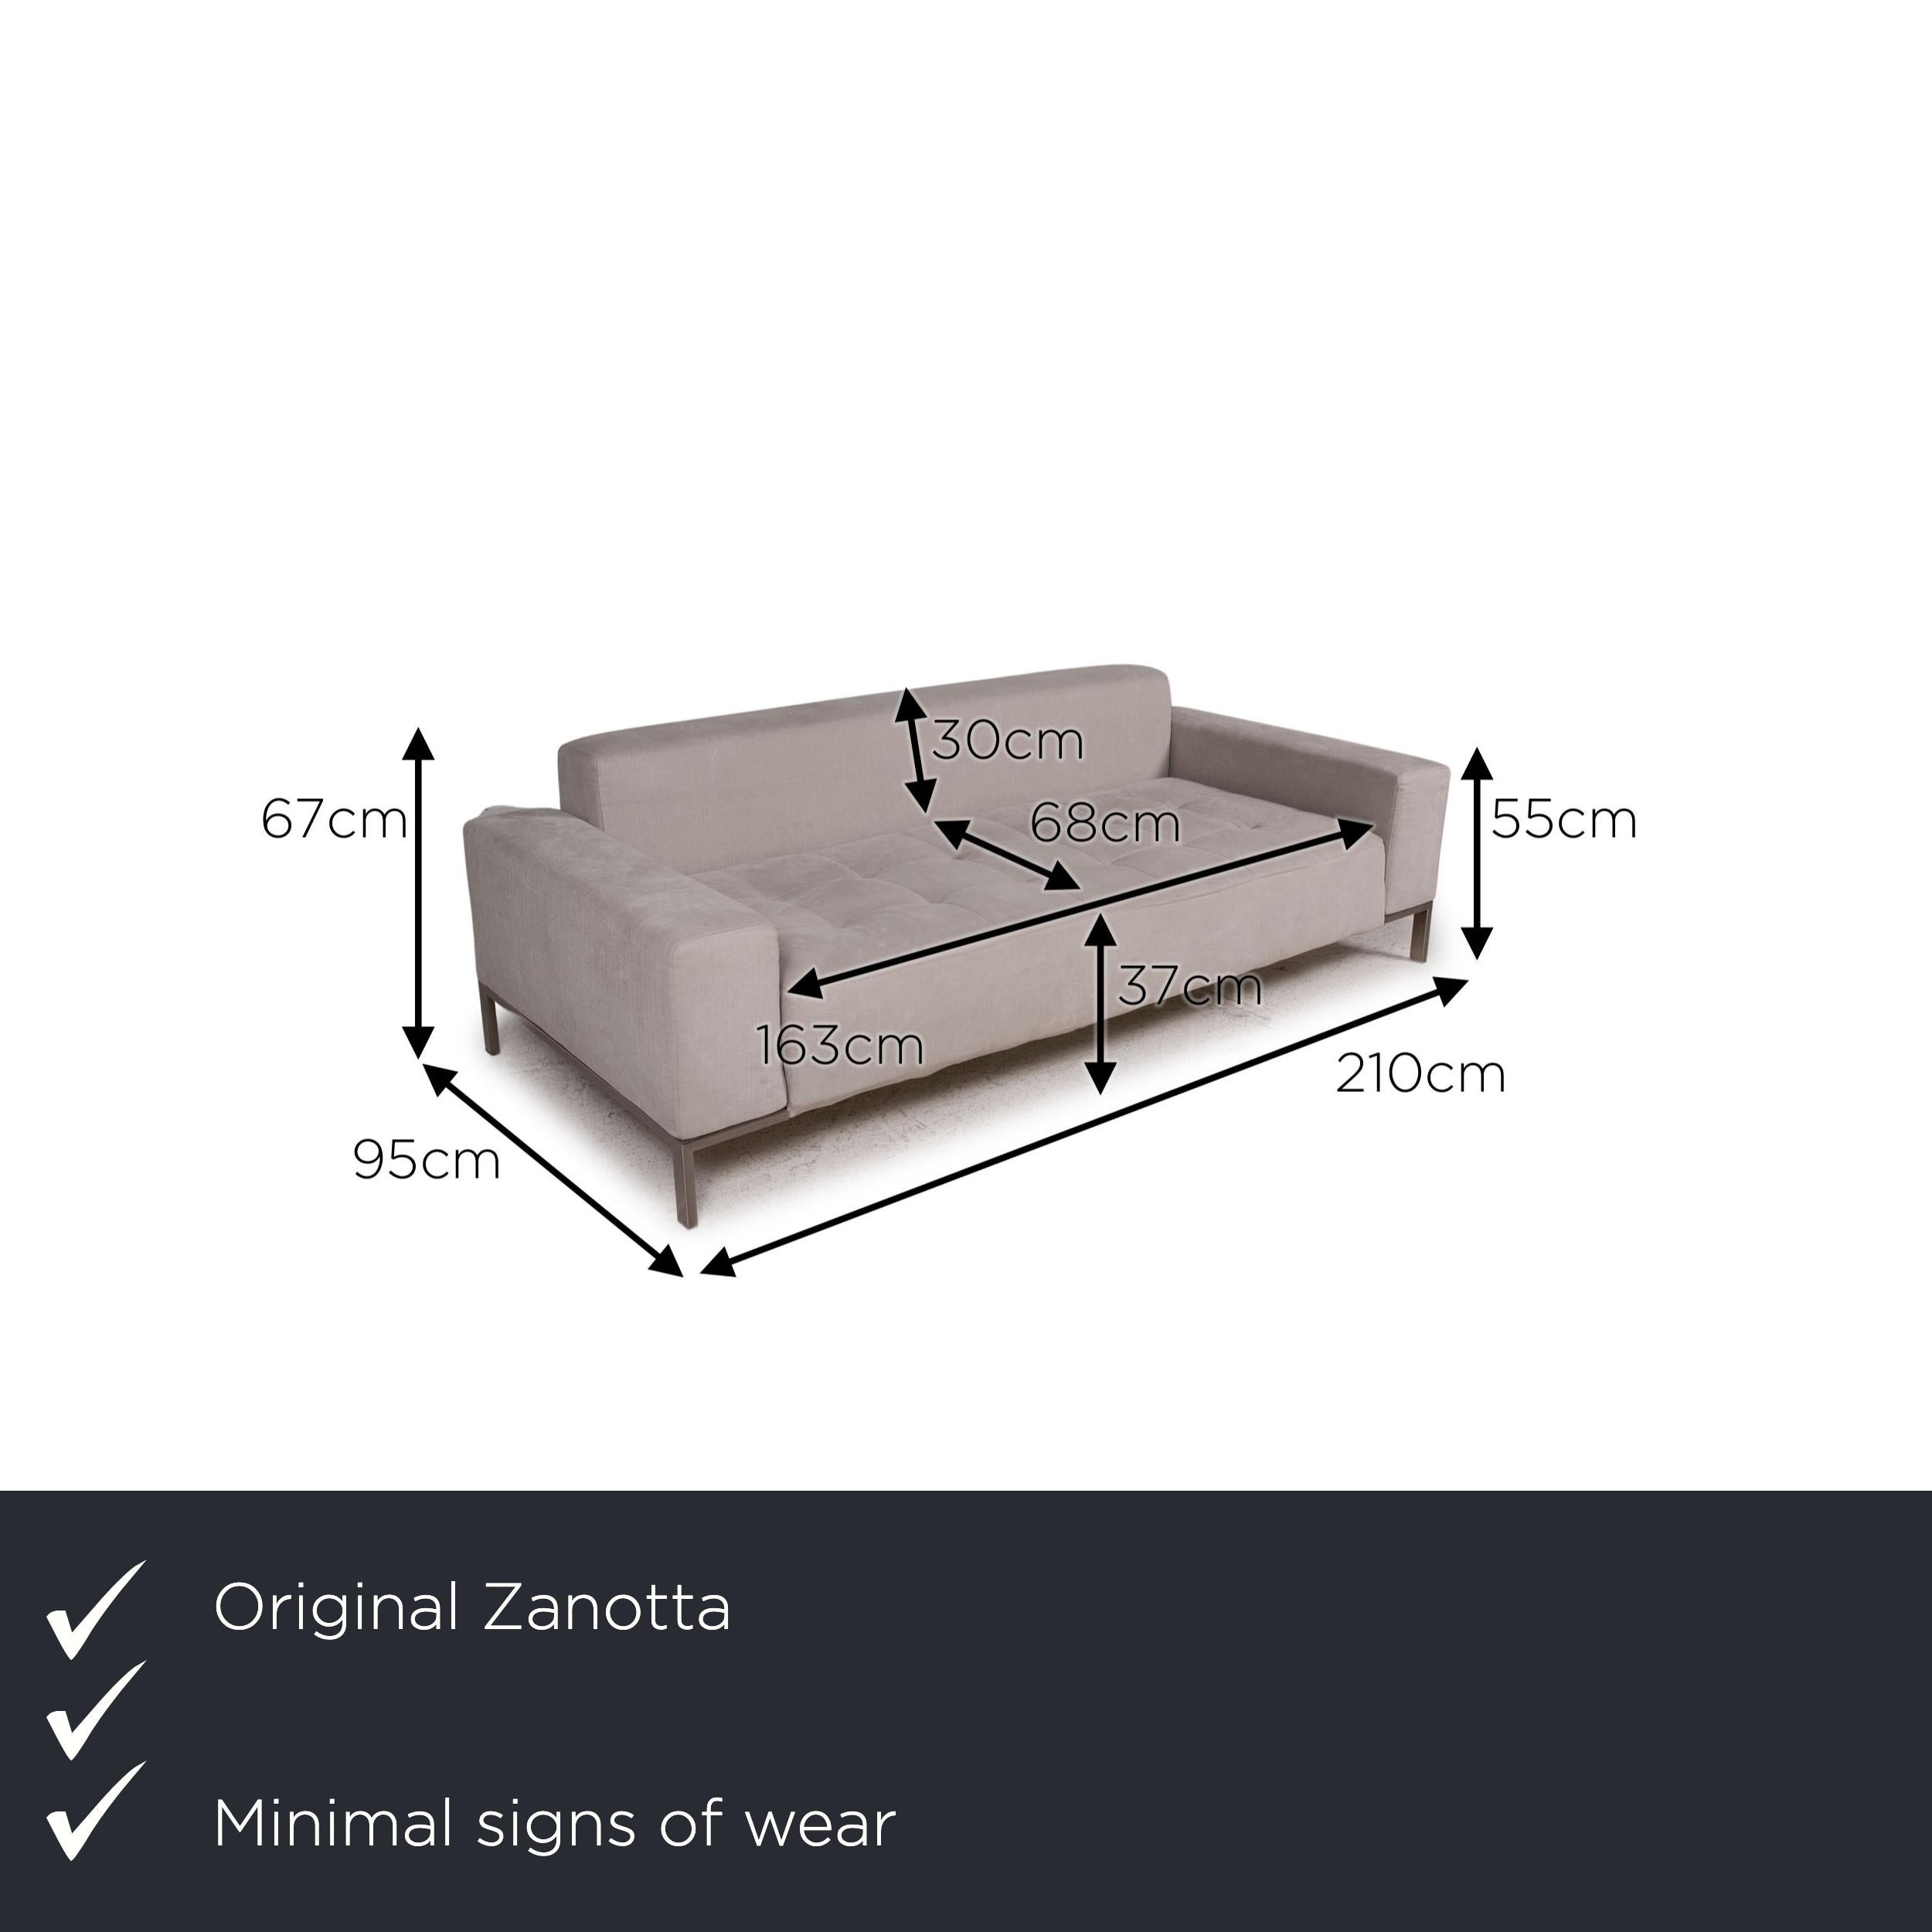 We present to you a Zanotta Alfa fabric sofa gray two-seater couch.

Product measurements in centimeters:

depth: 95
width: 210
height: 67
seat height: 37
rest height: 55
seat depth: 68
seat width: 163
back height: 30.

 